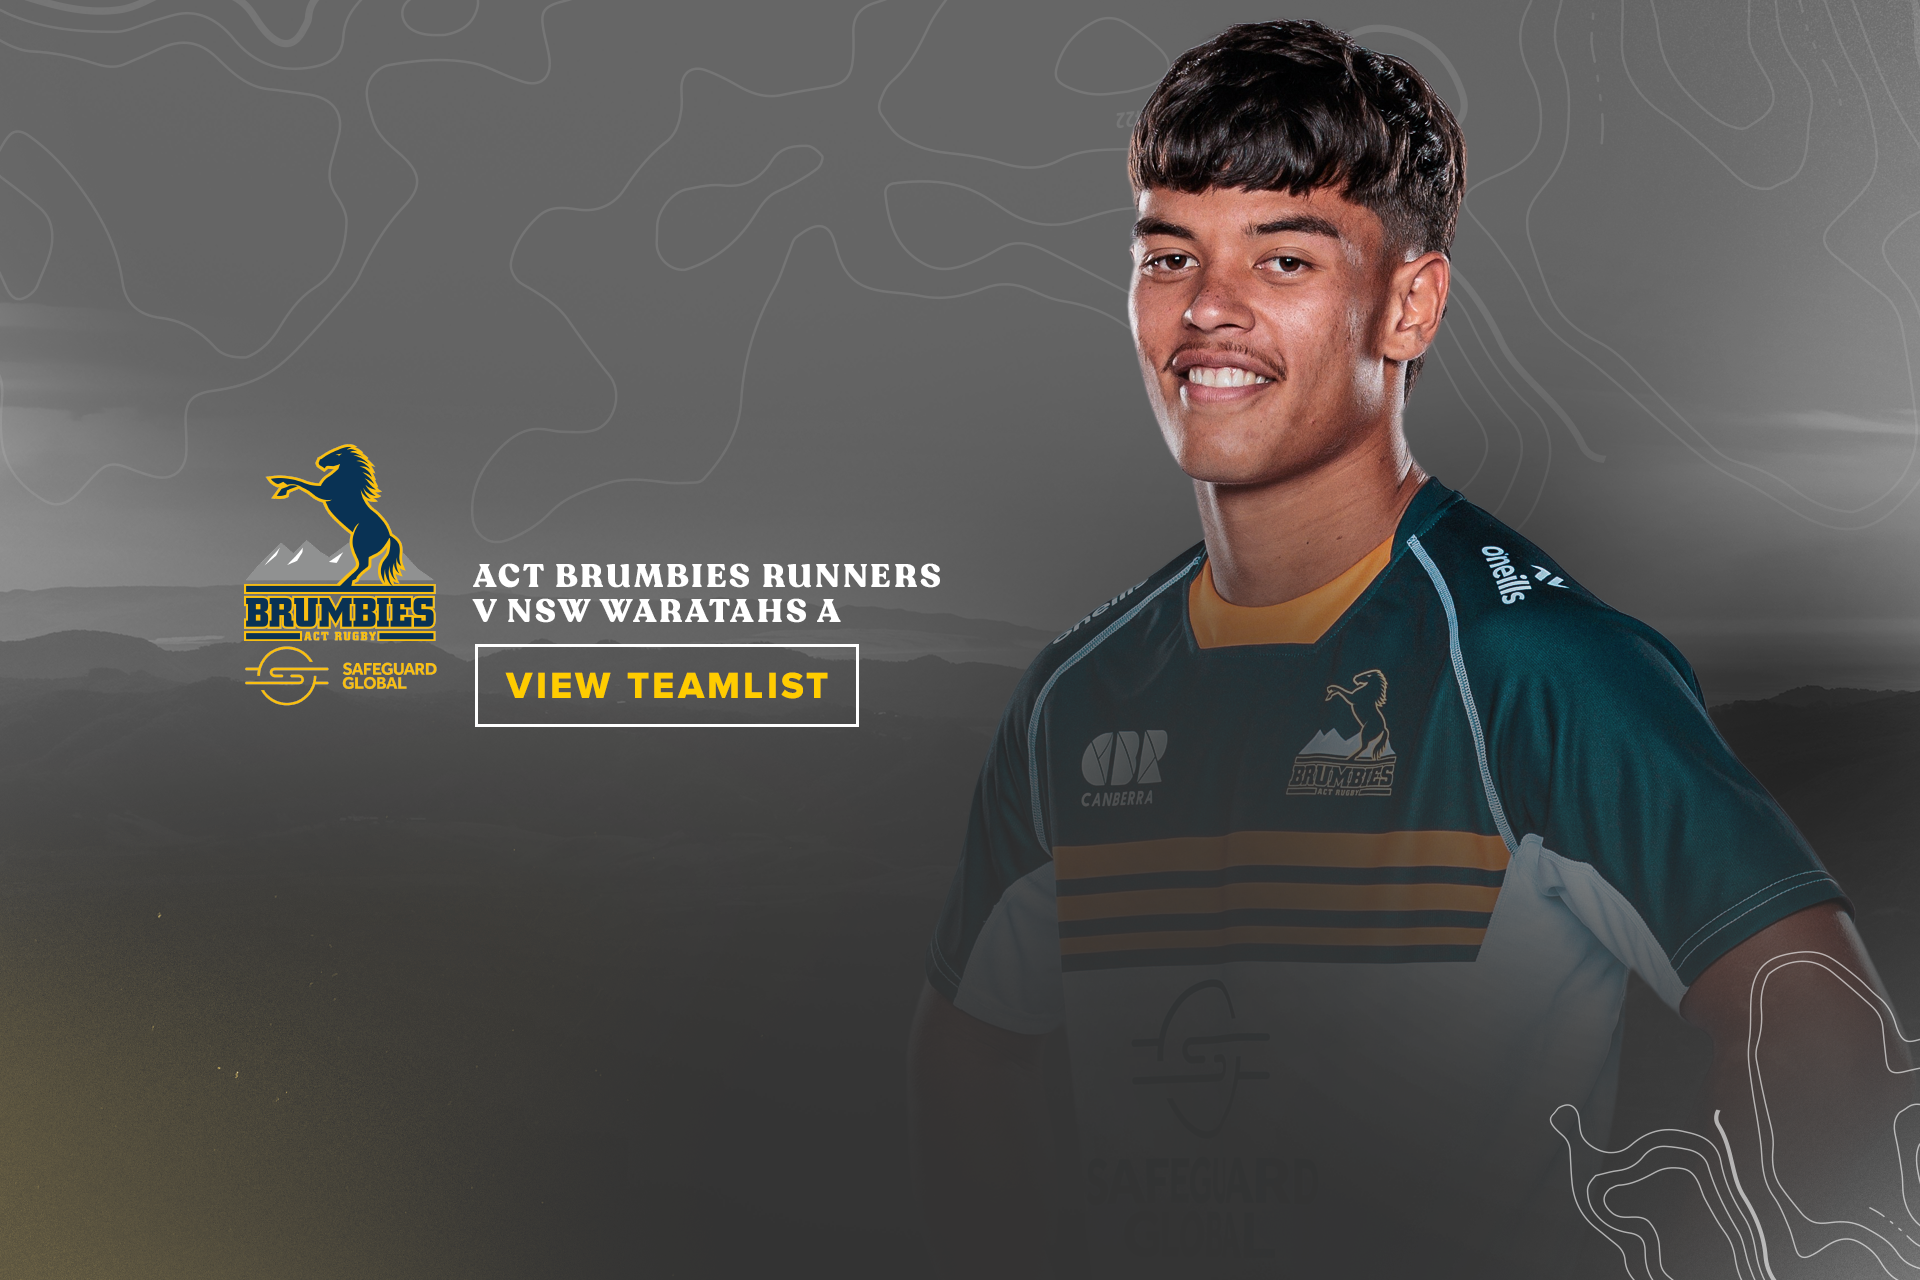 Brumbies Academy's Cullen Gray had a strong showing against Western Force A last weekend.